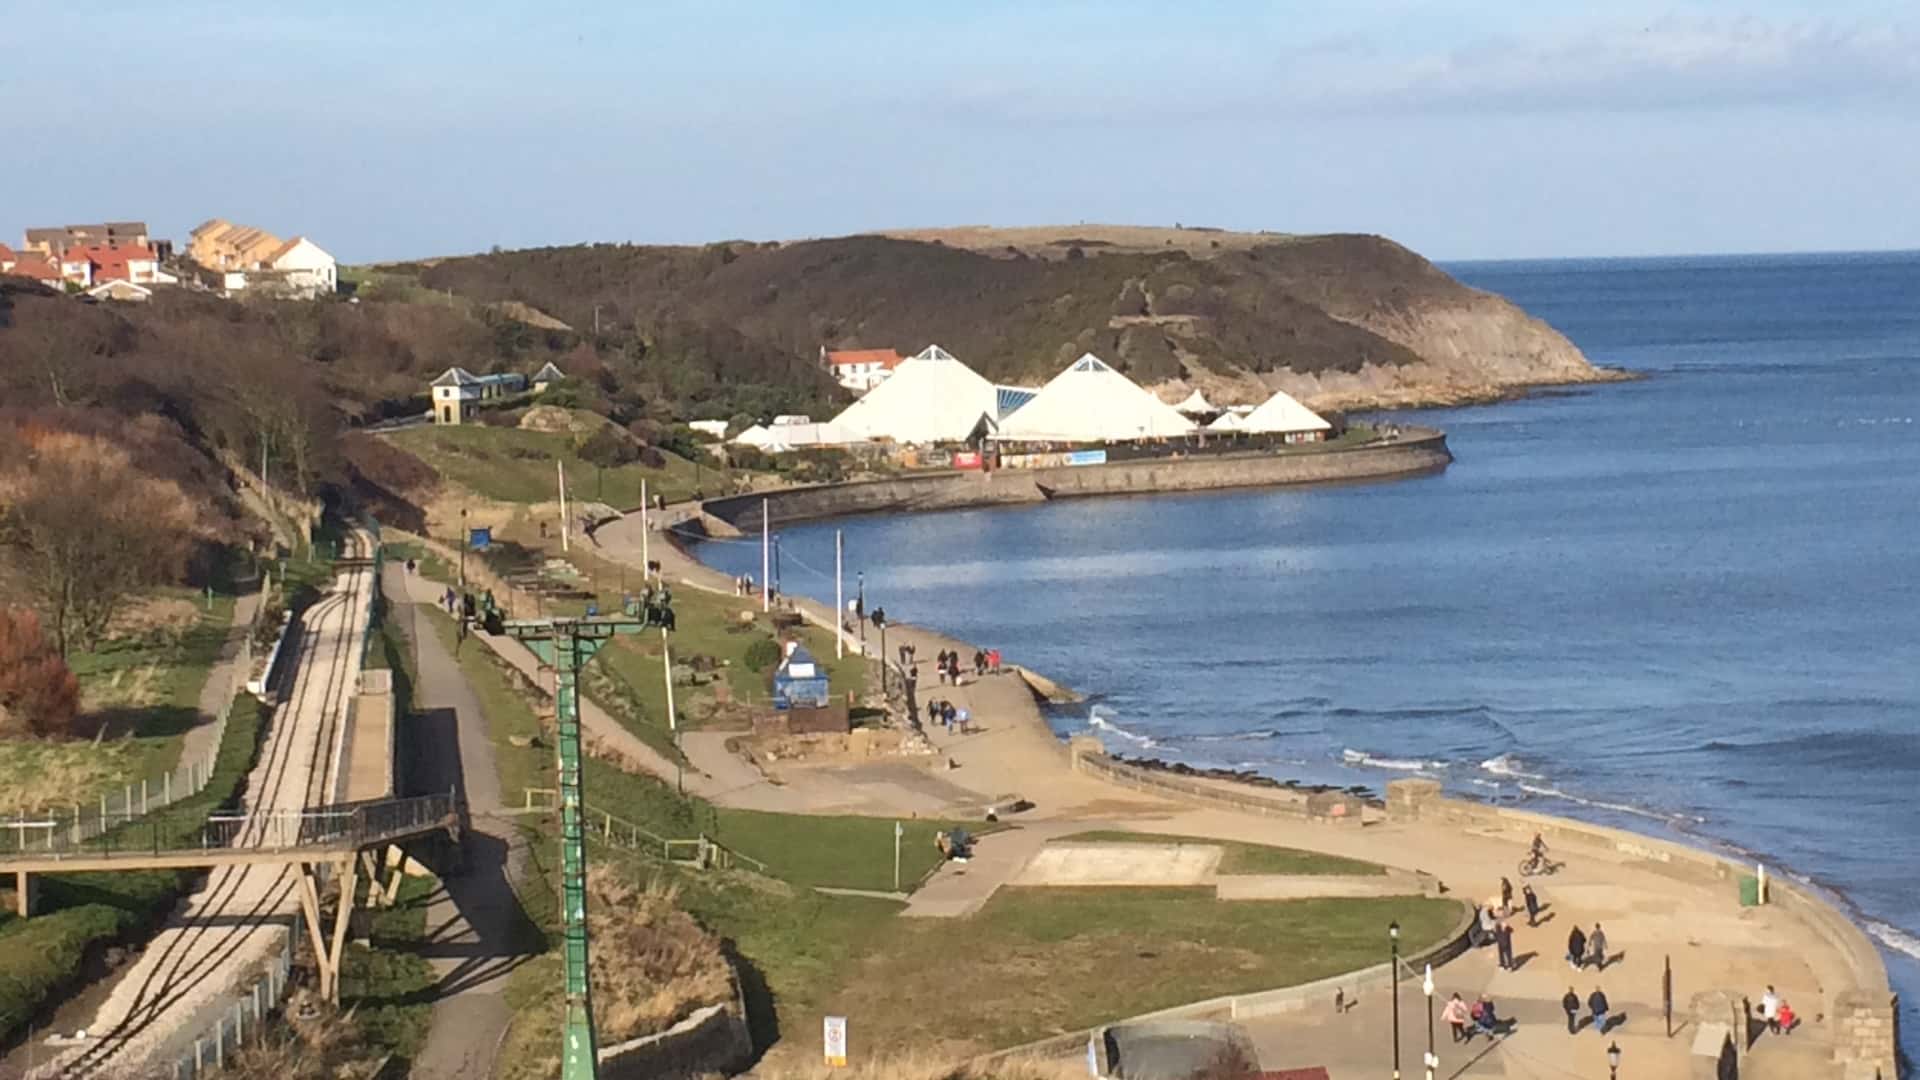 View of Scarbrough SEA LIFE Centre from the former site of Mr Marvels